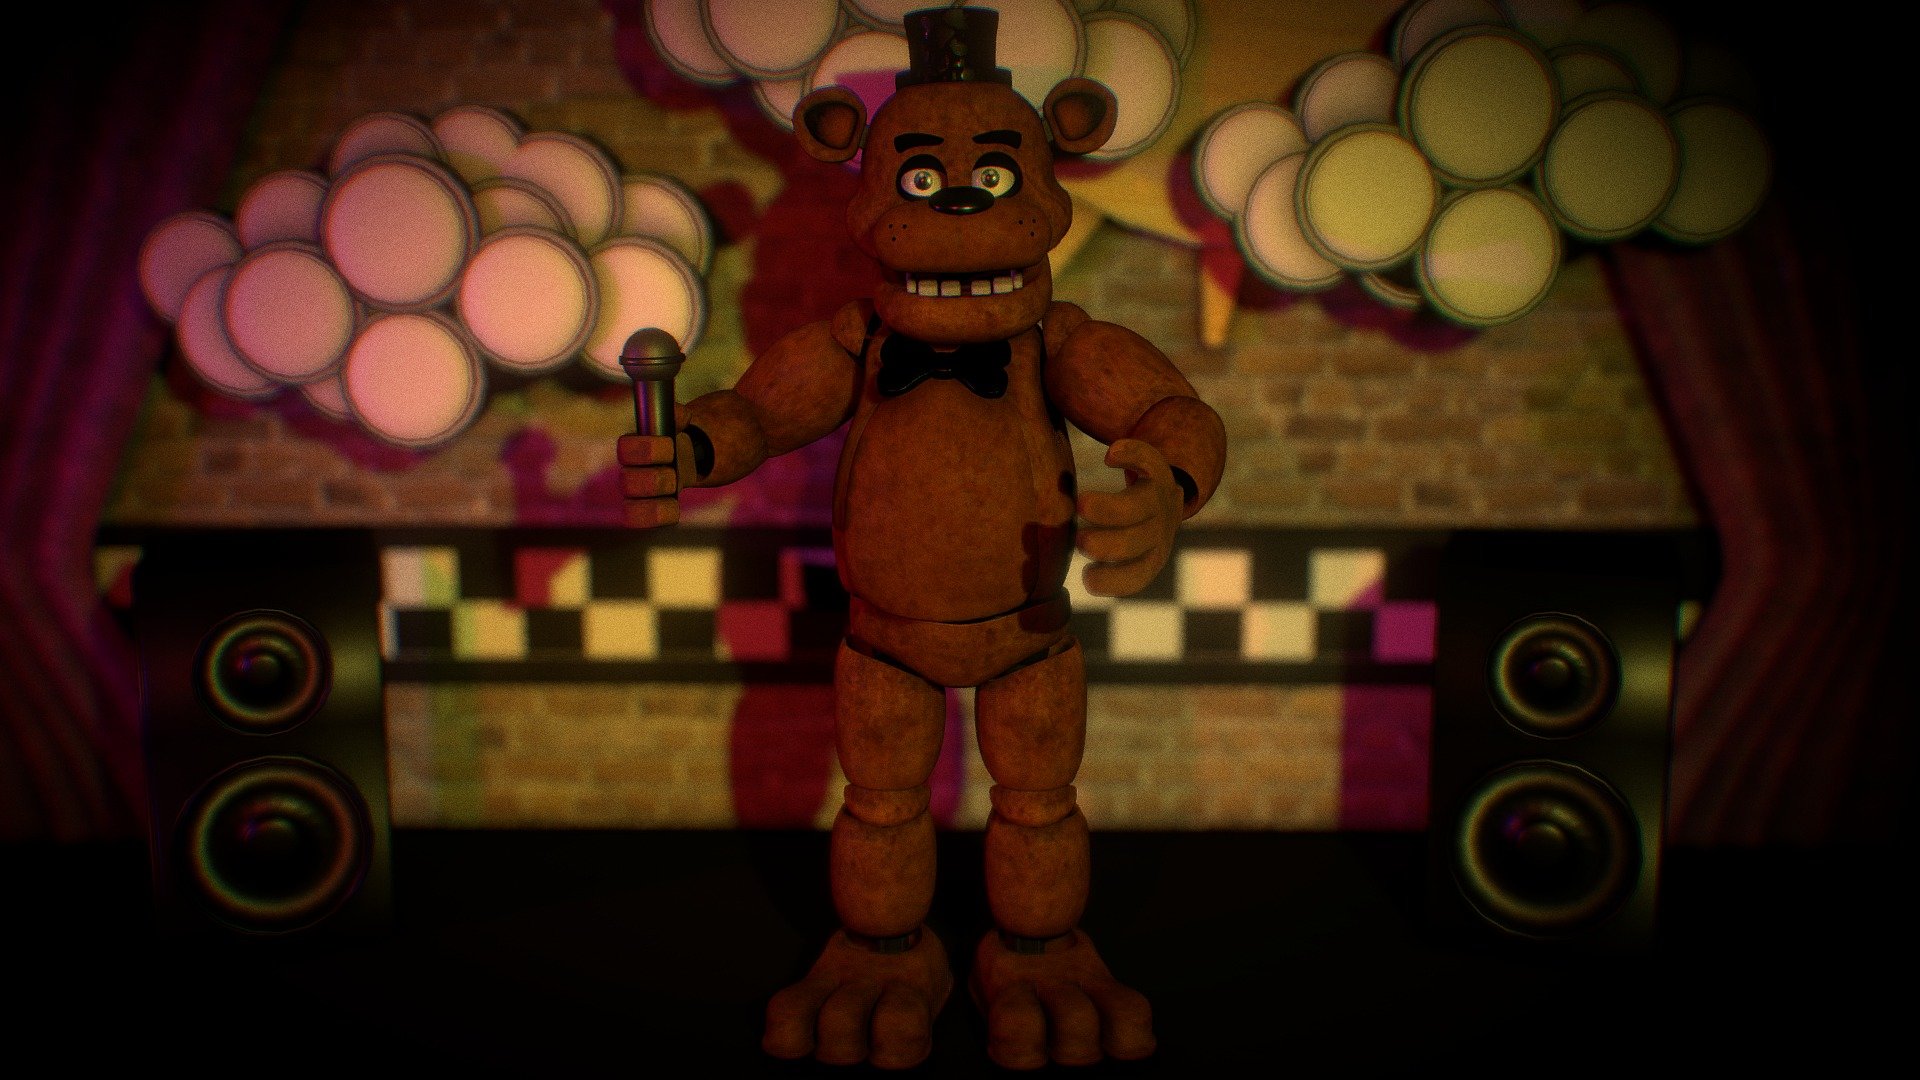 Yay! The setup took me 3 hours, I hope you guys like it! Time flies. Don't forget to check  my DEVIANTART Fazersion.deviantart.com . I modelled him and the scene in BLENDER.
There won't be a release now but maybe&hellip; I said maybe!
Freddy textures by: YinYangGio1987 and RynFox
YinYangGio1987.deviantart.com
RynFox.deviantart.com

2021 EDIT: Hey :) Please do not ask for a download, as I do not have the files anymore, they're lost :/. 

THE MODEL WAS MODELED BY ME 3d model